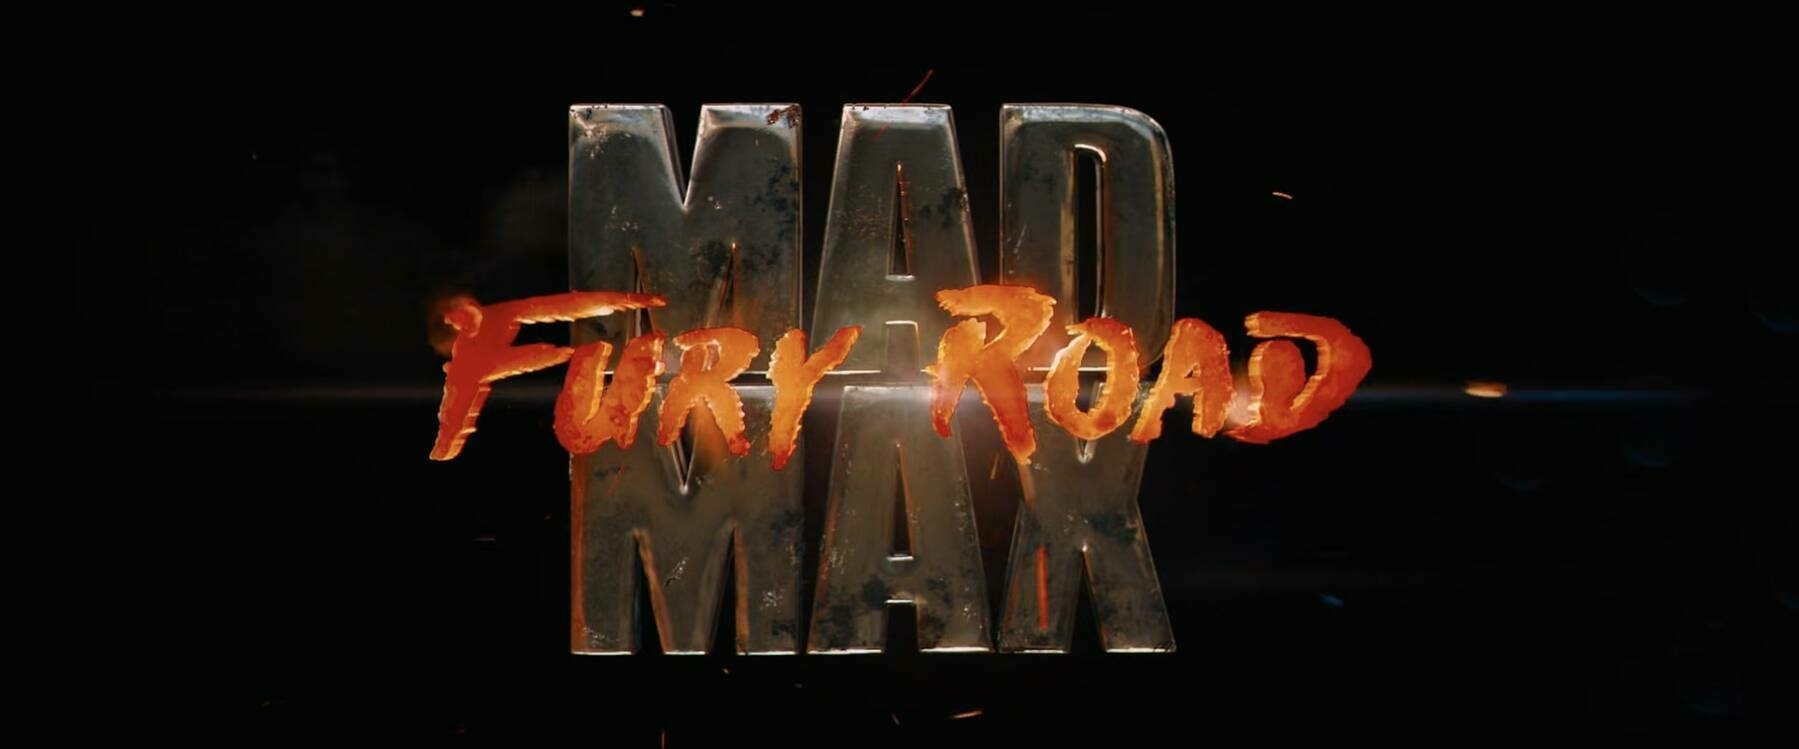 The title card for the film, Mad Max: Fury Road.